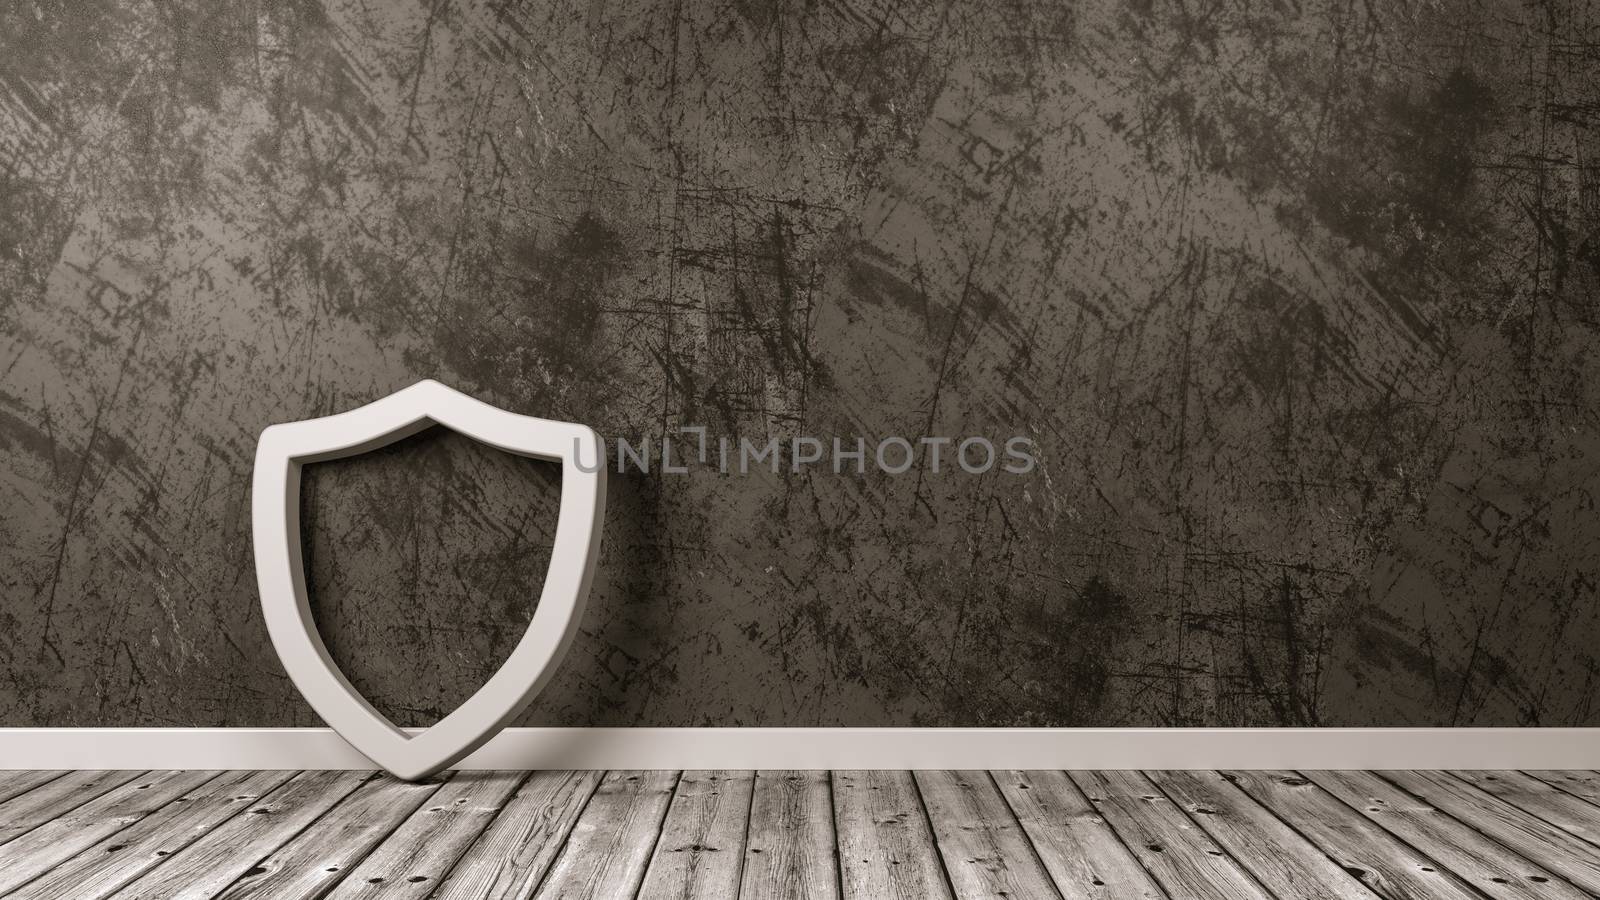 White Shield 3D Symbol Shape on Wooden Floor Against Gray Wall with Copy Space 3D Illustration